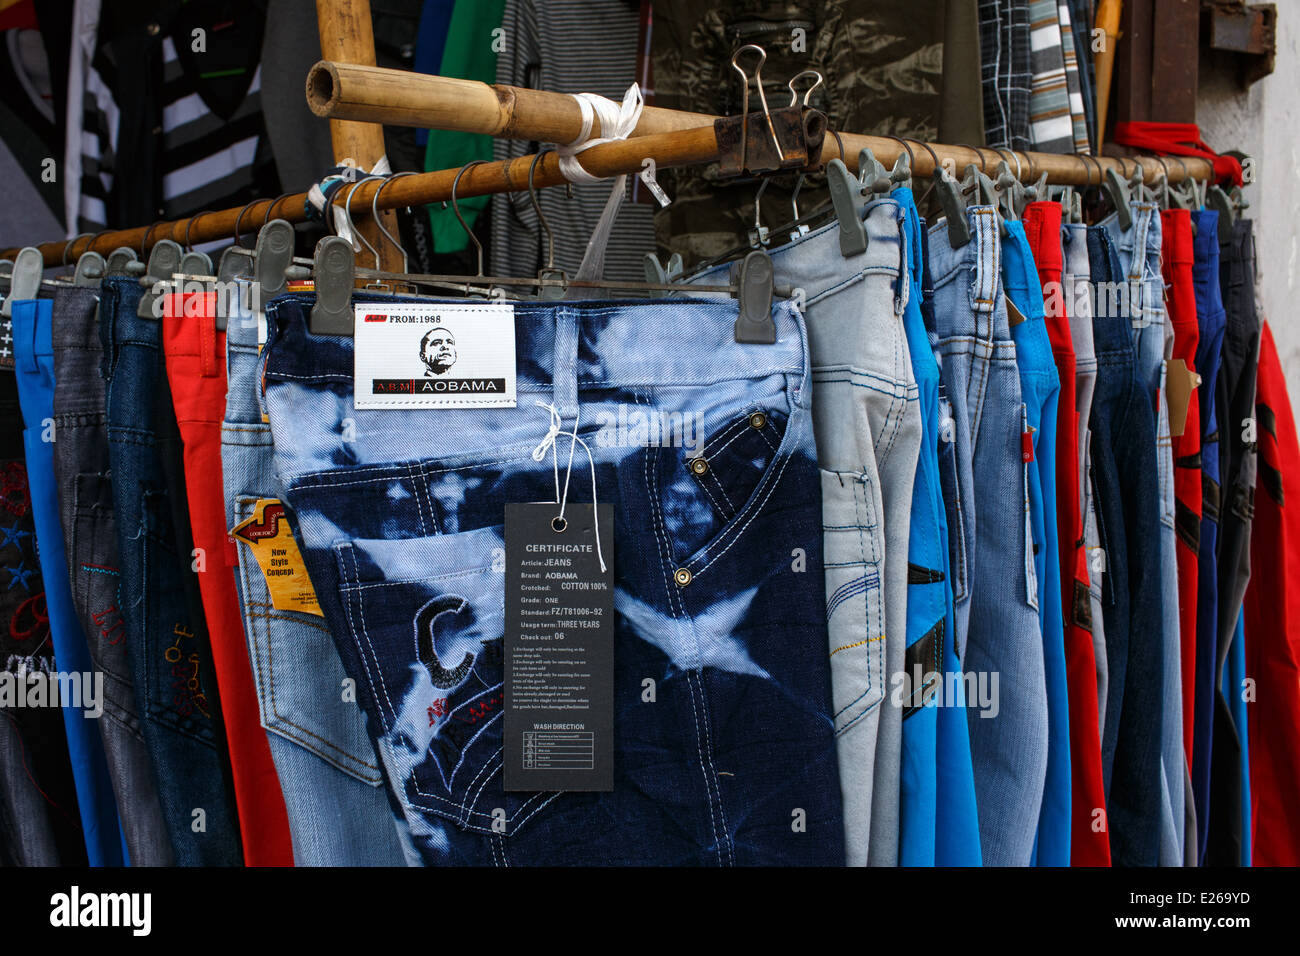 https://c8.alamy.com/comp/E269YD/aobama-jeans-with-a-logo-showing-barack-obama-for-sale-at-the-market-E269YD.jpg